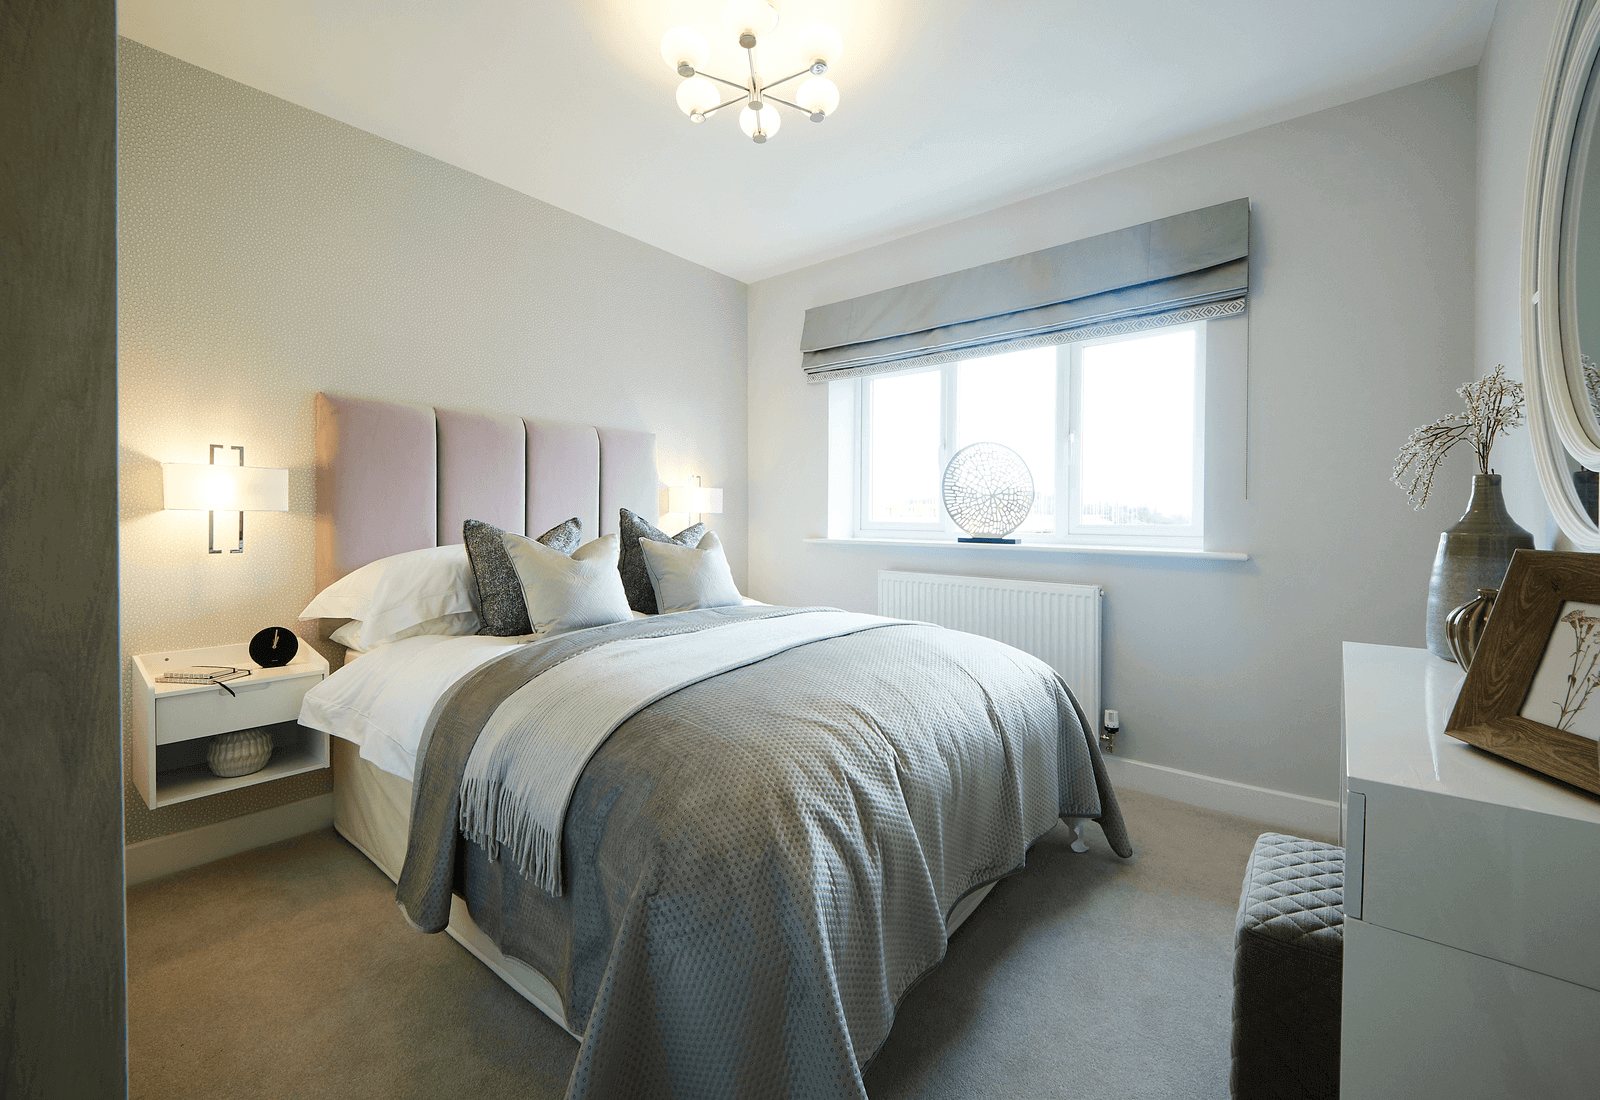 Bedroom 2 in a Baycliffe Show Home